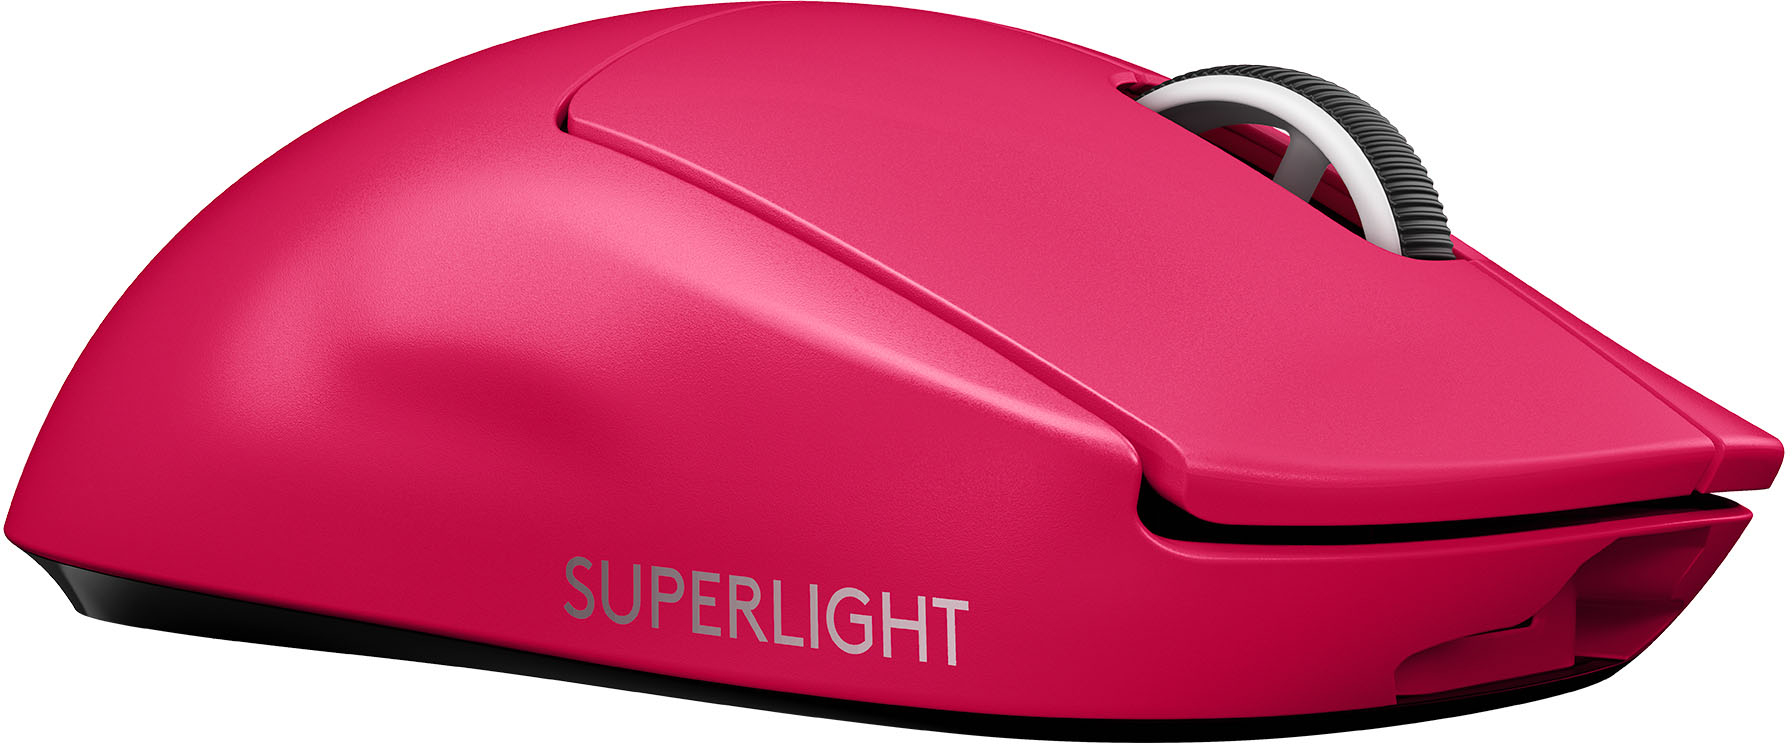 Cyber Monday Logitech G Pro X Superlight Wireless Gaming Mouse Deal Is  Still Live - IGN